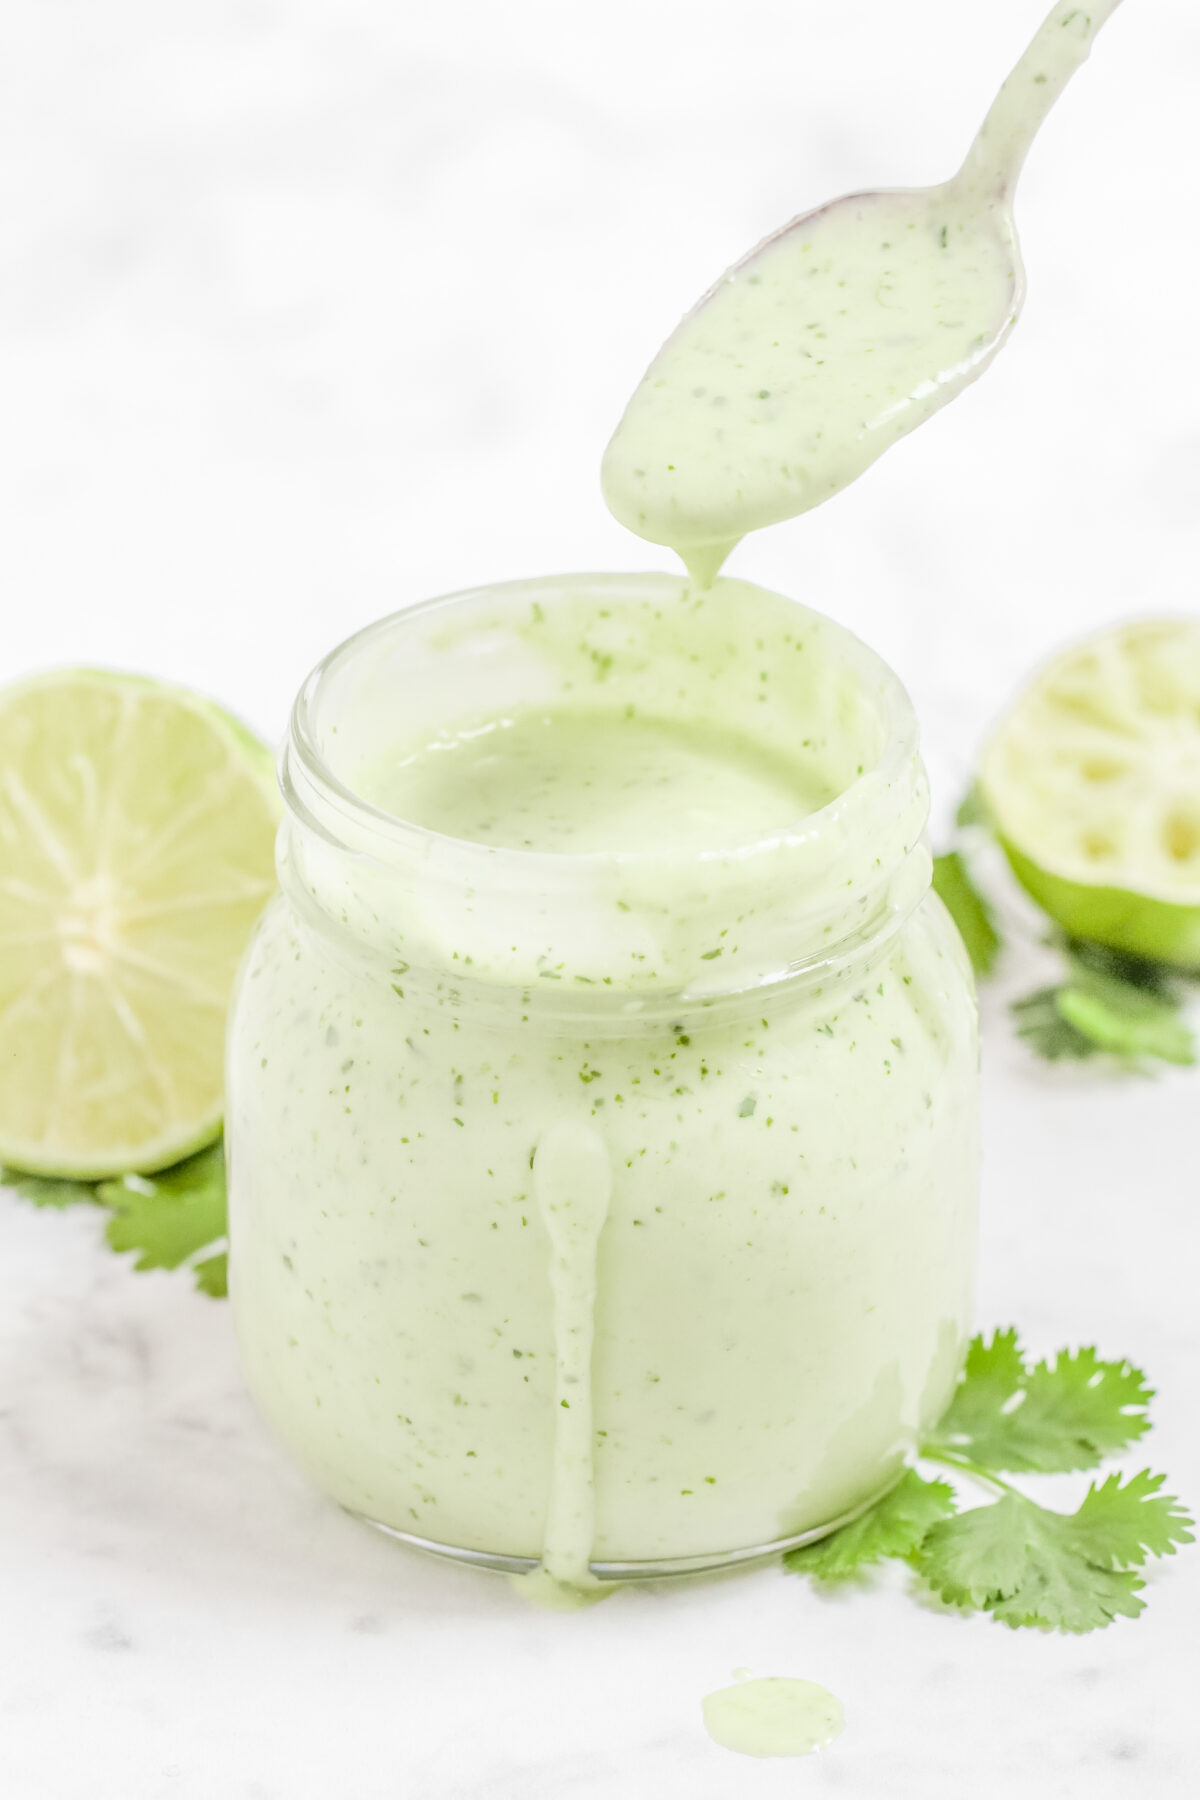 This creamy cilantro lime dressing recipe goes great on salads, grilled chicken, tacos or anything else that needs a little Mexican flair.